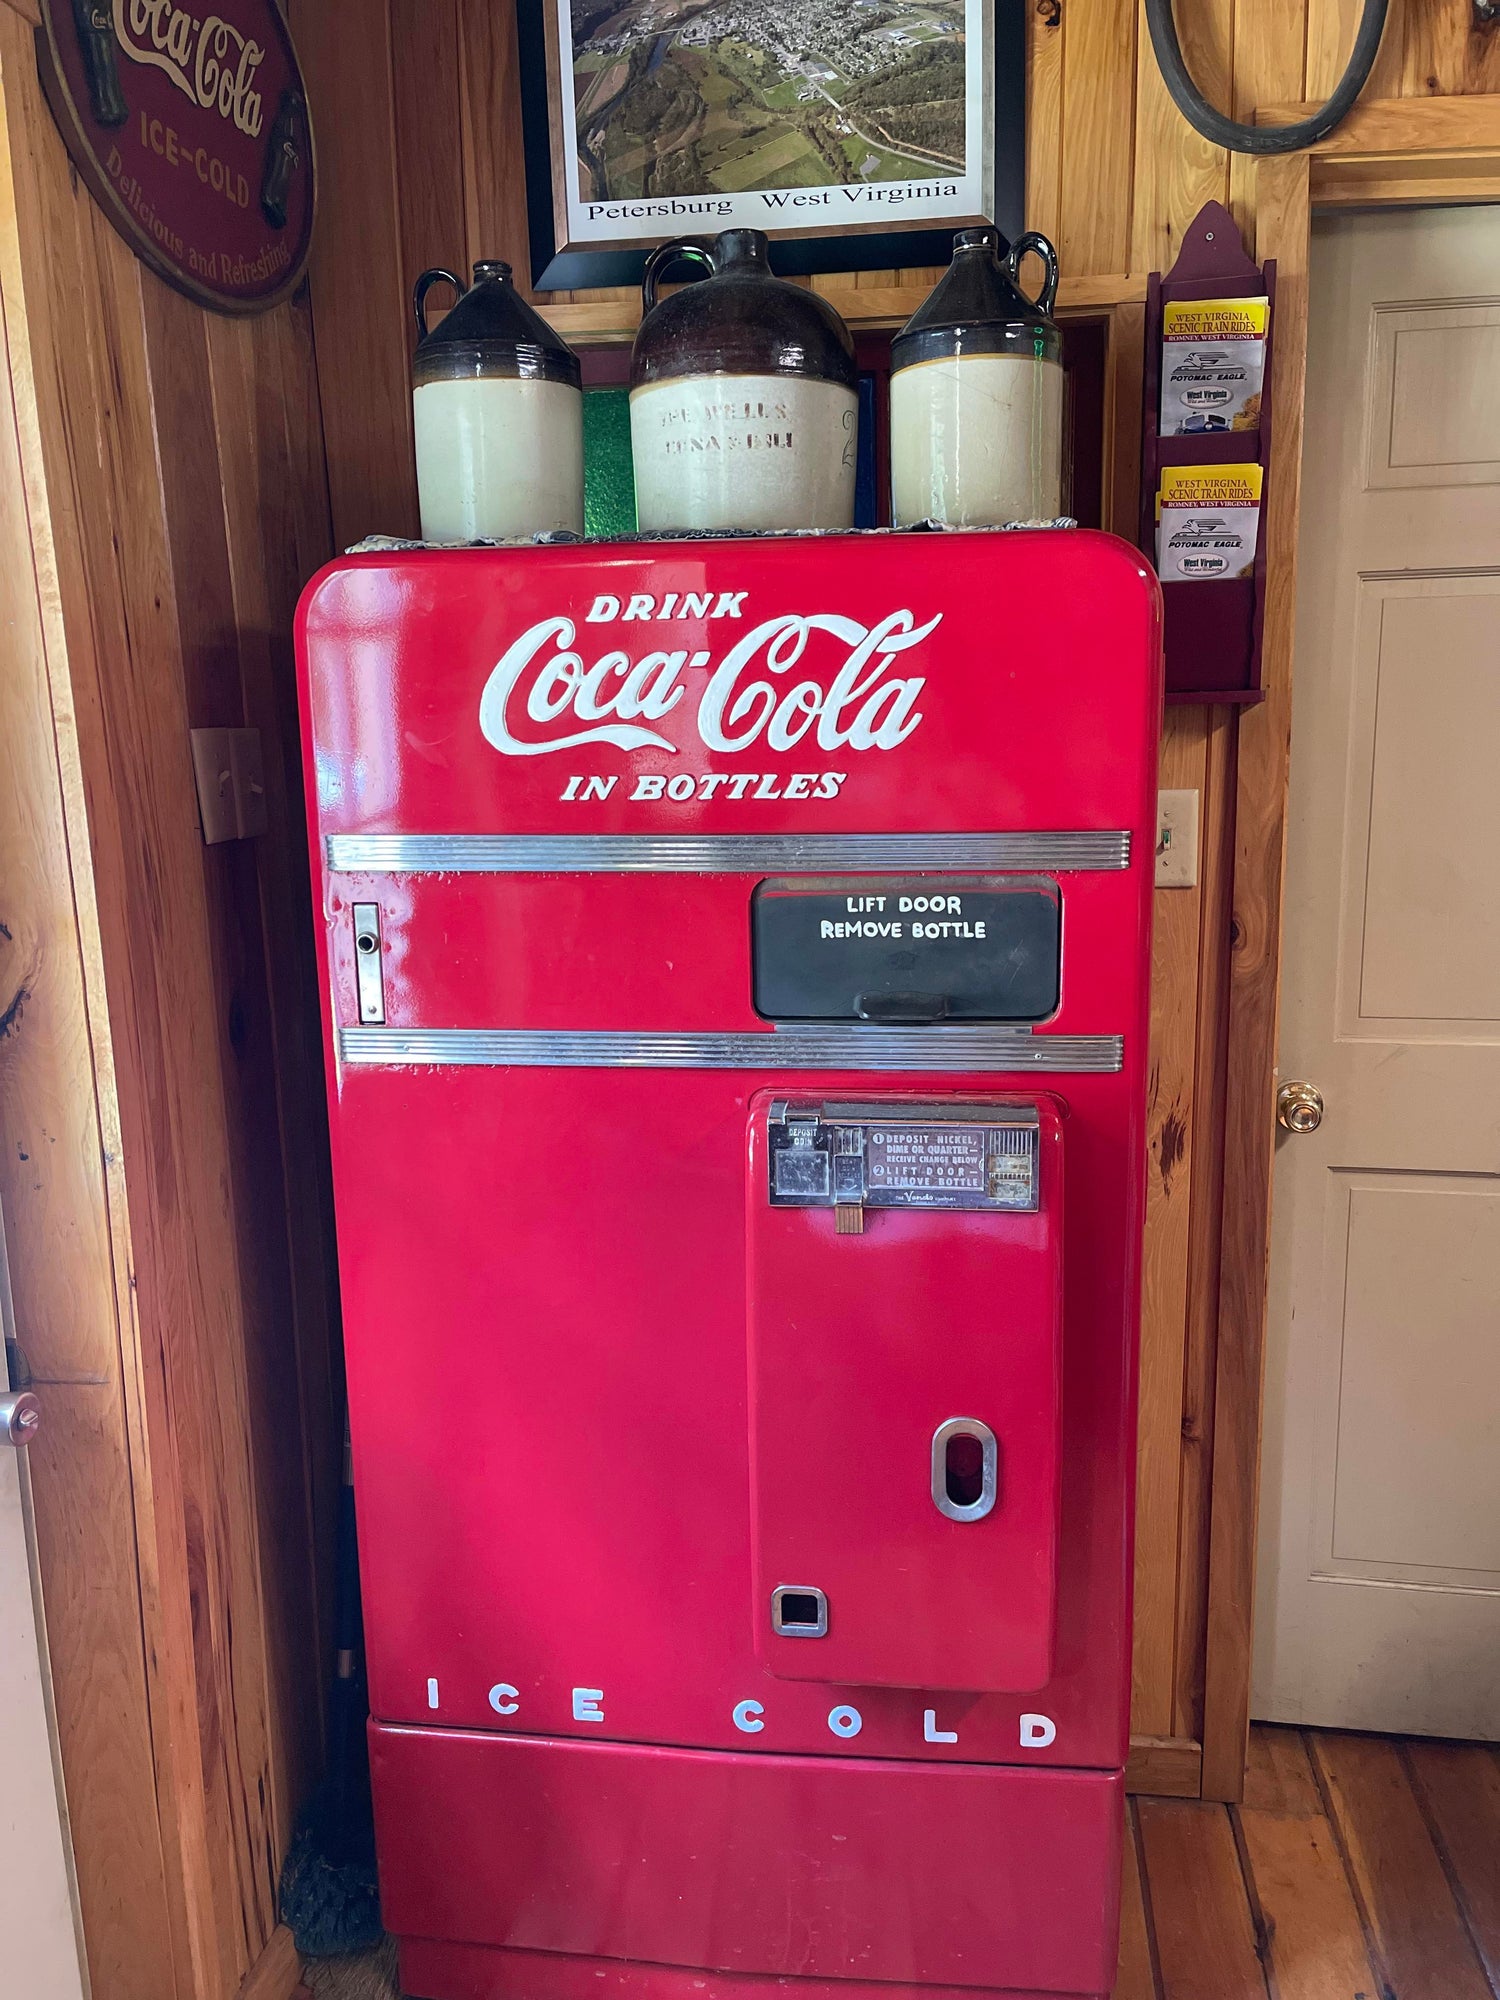 Coca-Cola Memorabilia at Appalachian Cabins Seneca Rocks WV Lodging Rentals with Things to Do in the Area Furnished Rustic Cabin Stay 